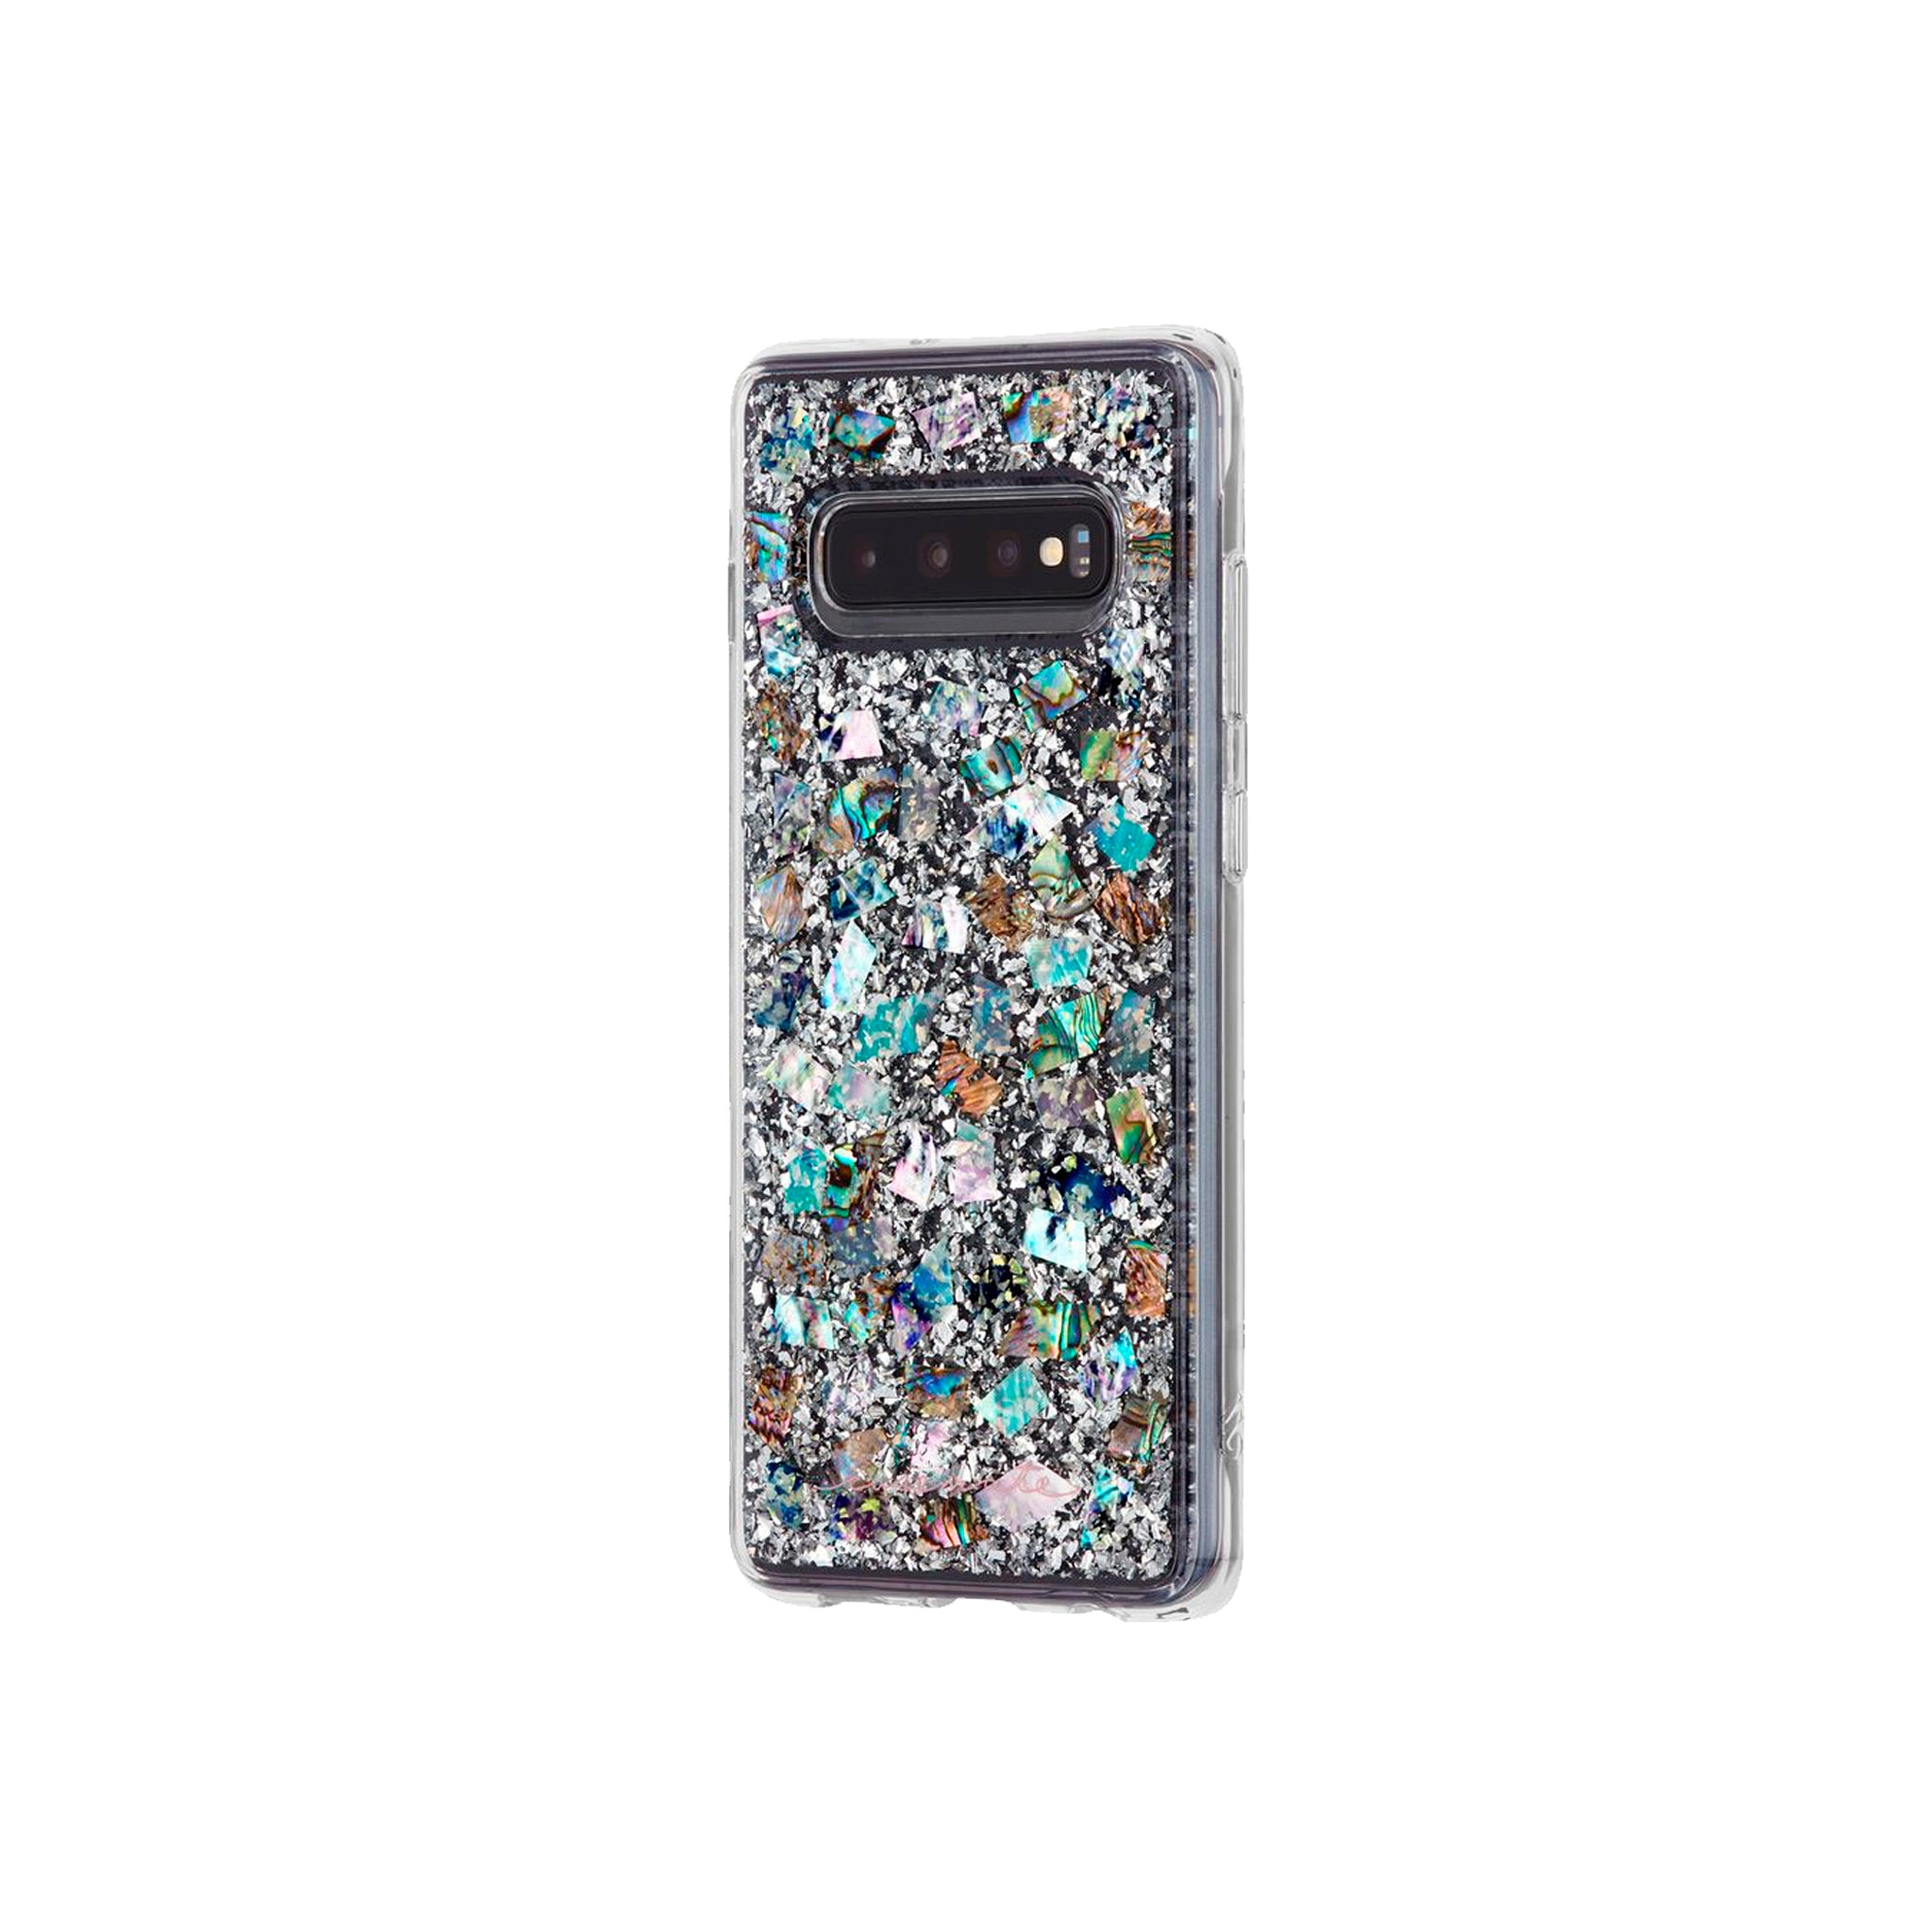 Case-mate - Karat Case For Samsung Galaxy S10 Plus - Mother Of Pearl